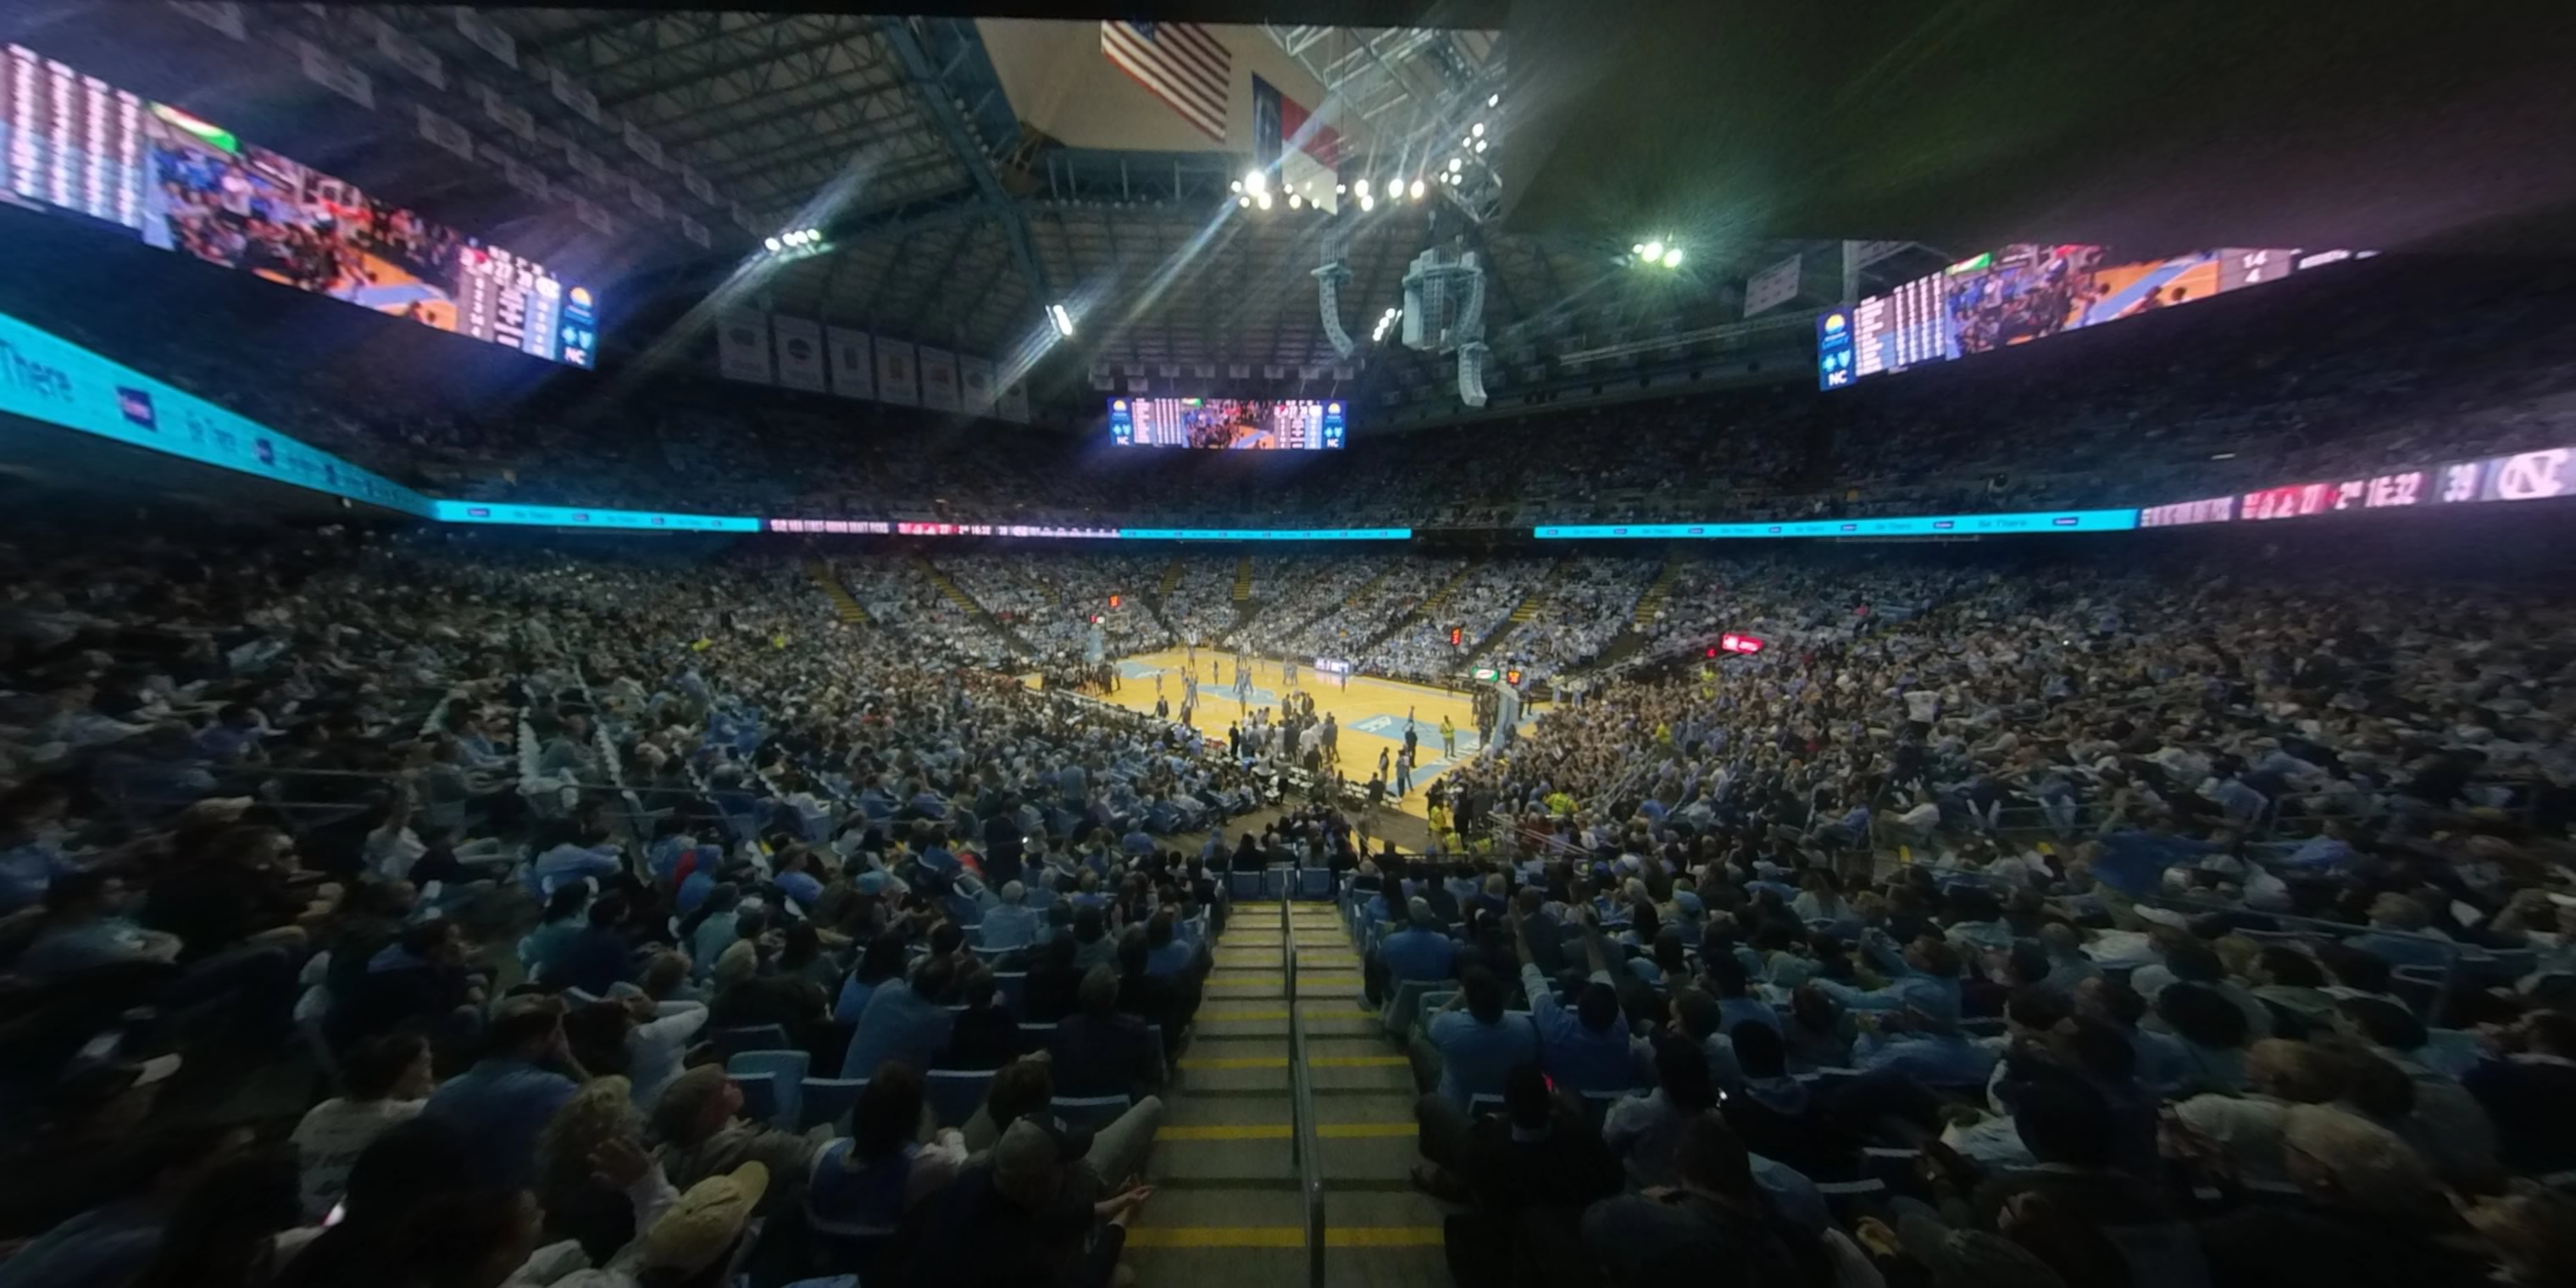 section 112 panoramic seat view  - dean smith center